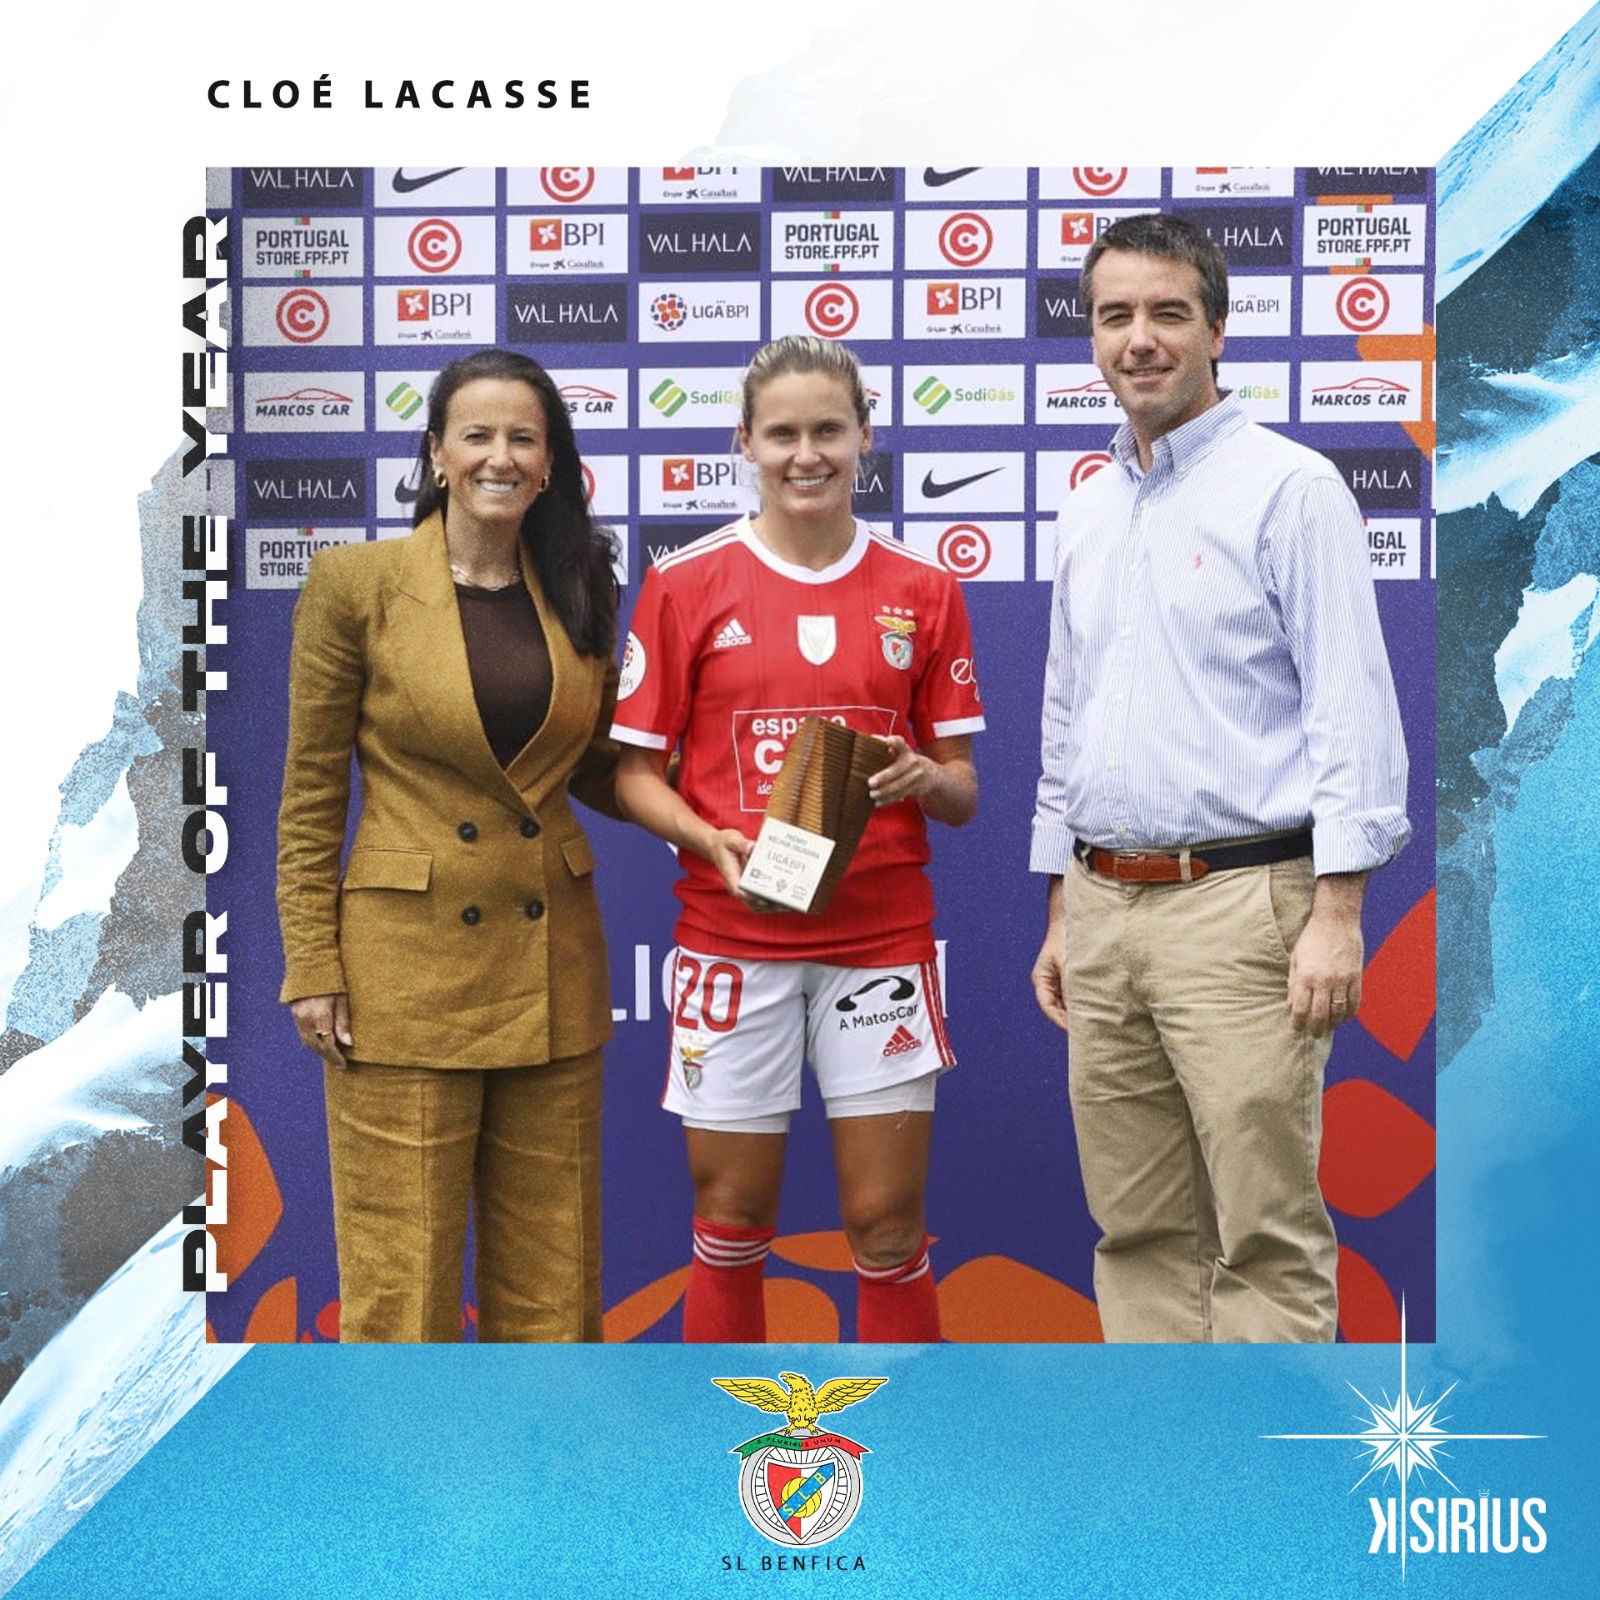 Player of the Year: Cloé Lacasse (SL Benfica)